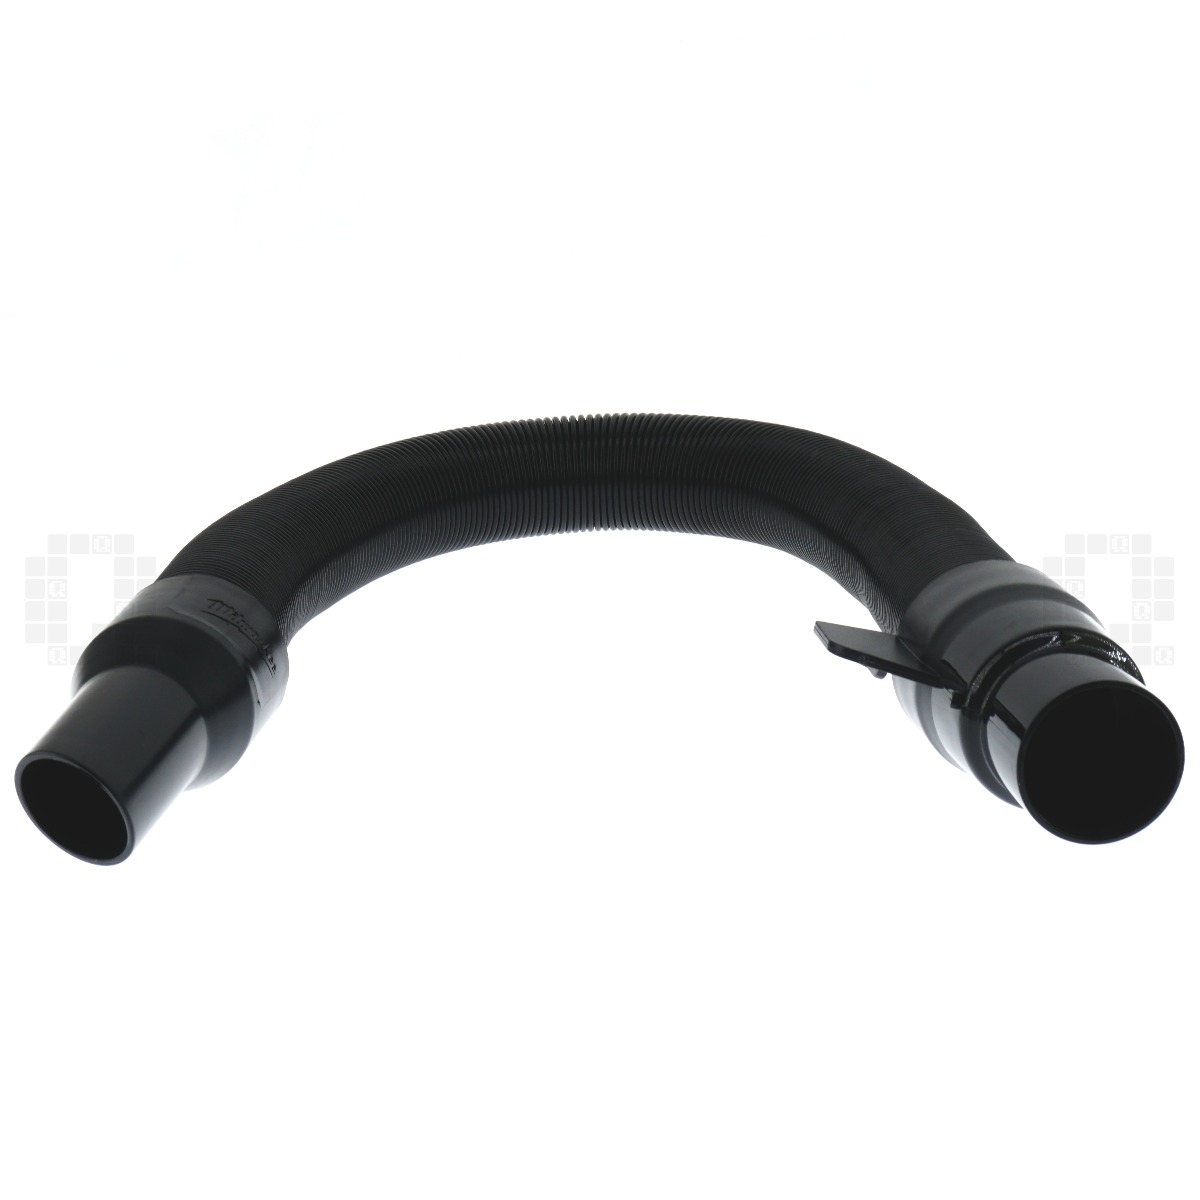 Milwaukee 14-37-0105 Wet/Dry Vacuum Hose Assembly (for Internal Storage)